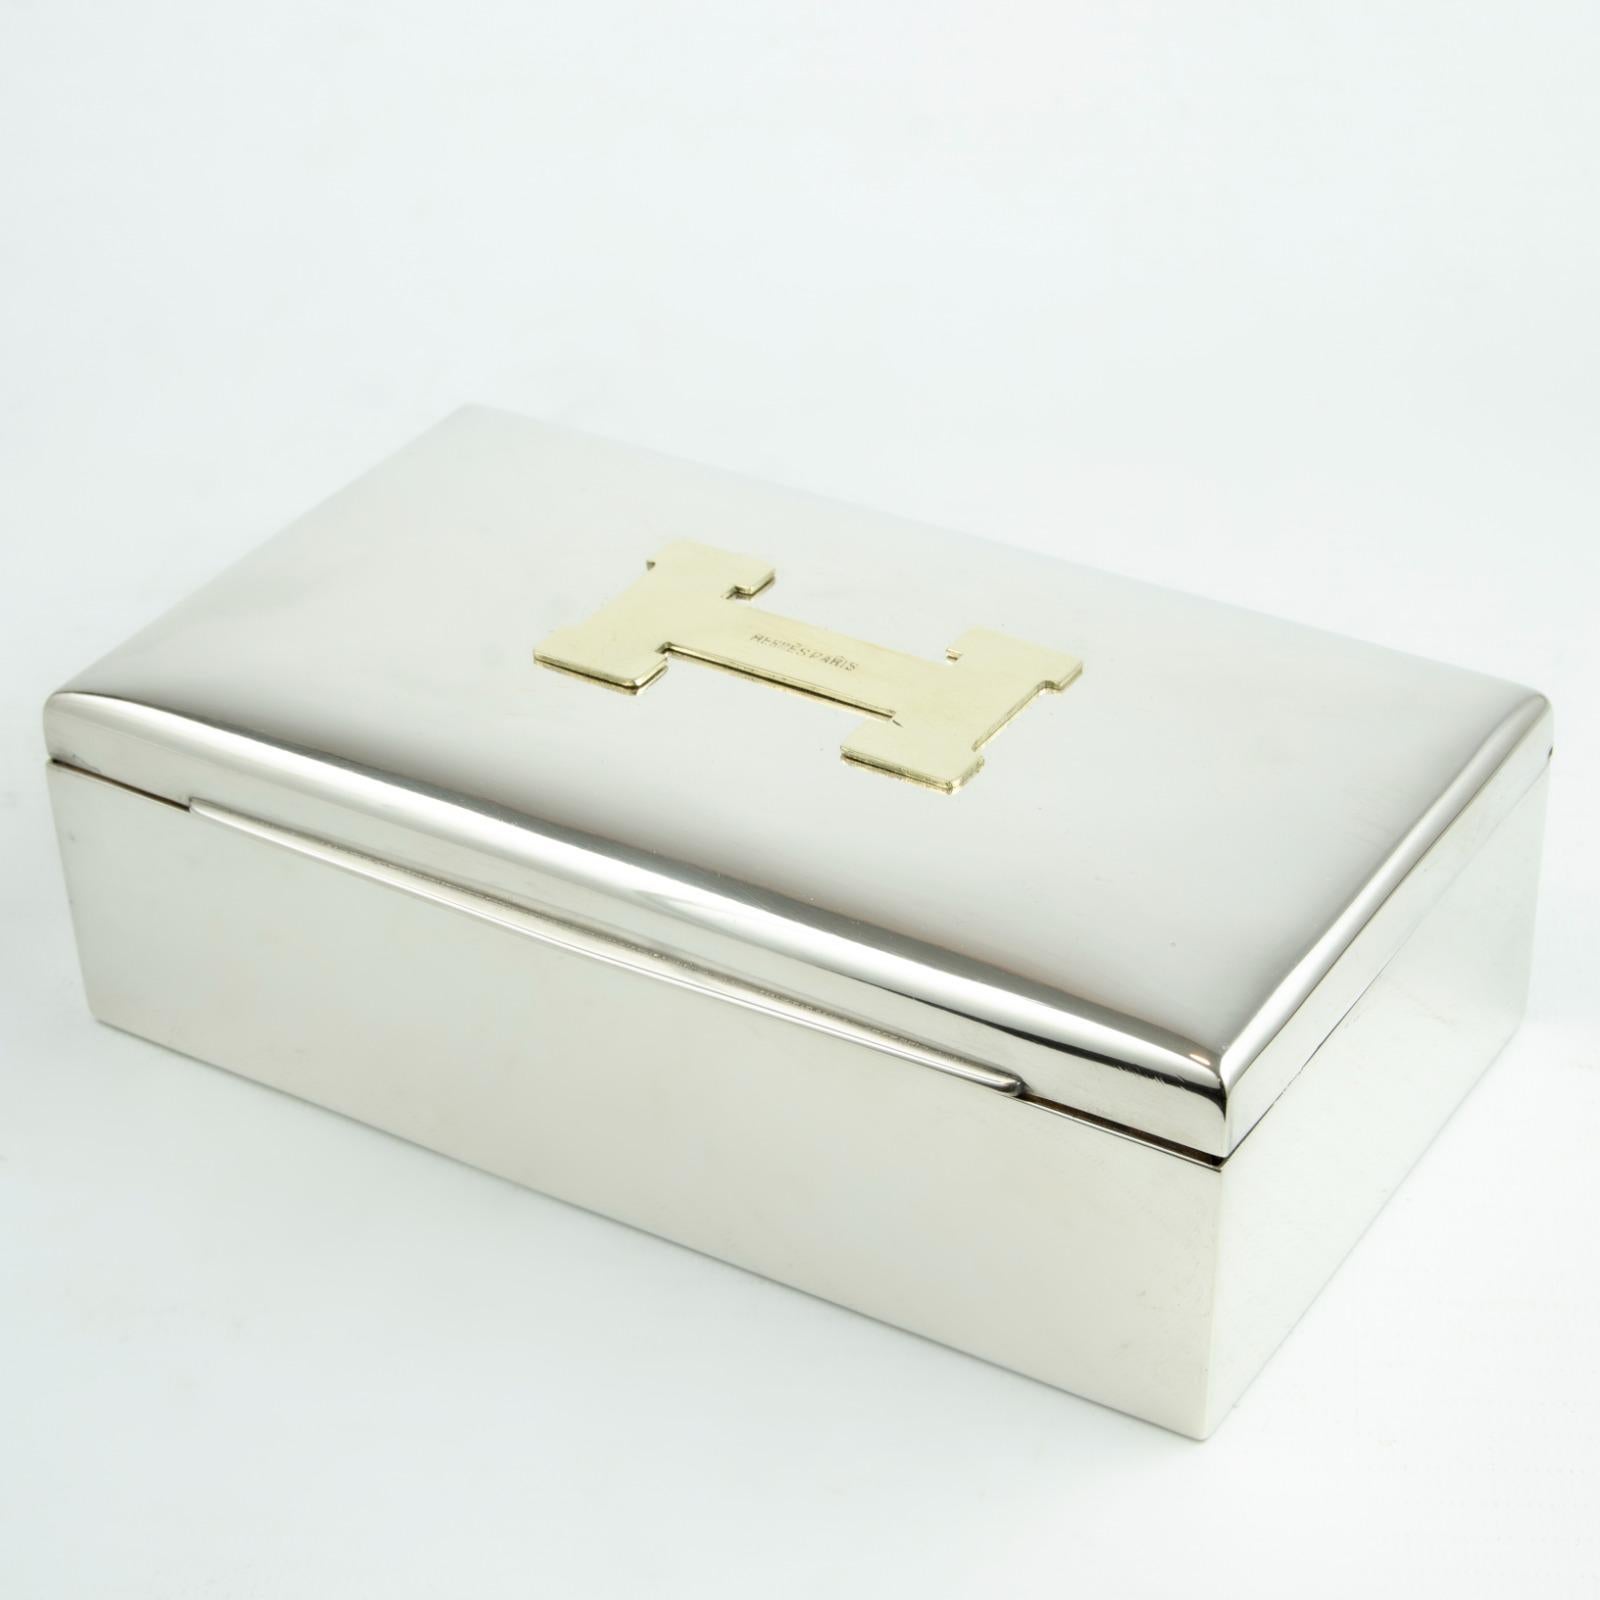 HERMES Paris vintage rare silver tone metal box featuring a large gold plated H design on top.

Material : Silver tone metal hardware / Gold tone metal hardware / Wood panel inner compartment.

Measurements
10,3 centimeters Depth
18,5 centimeters